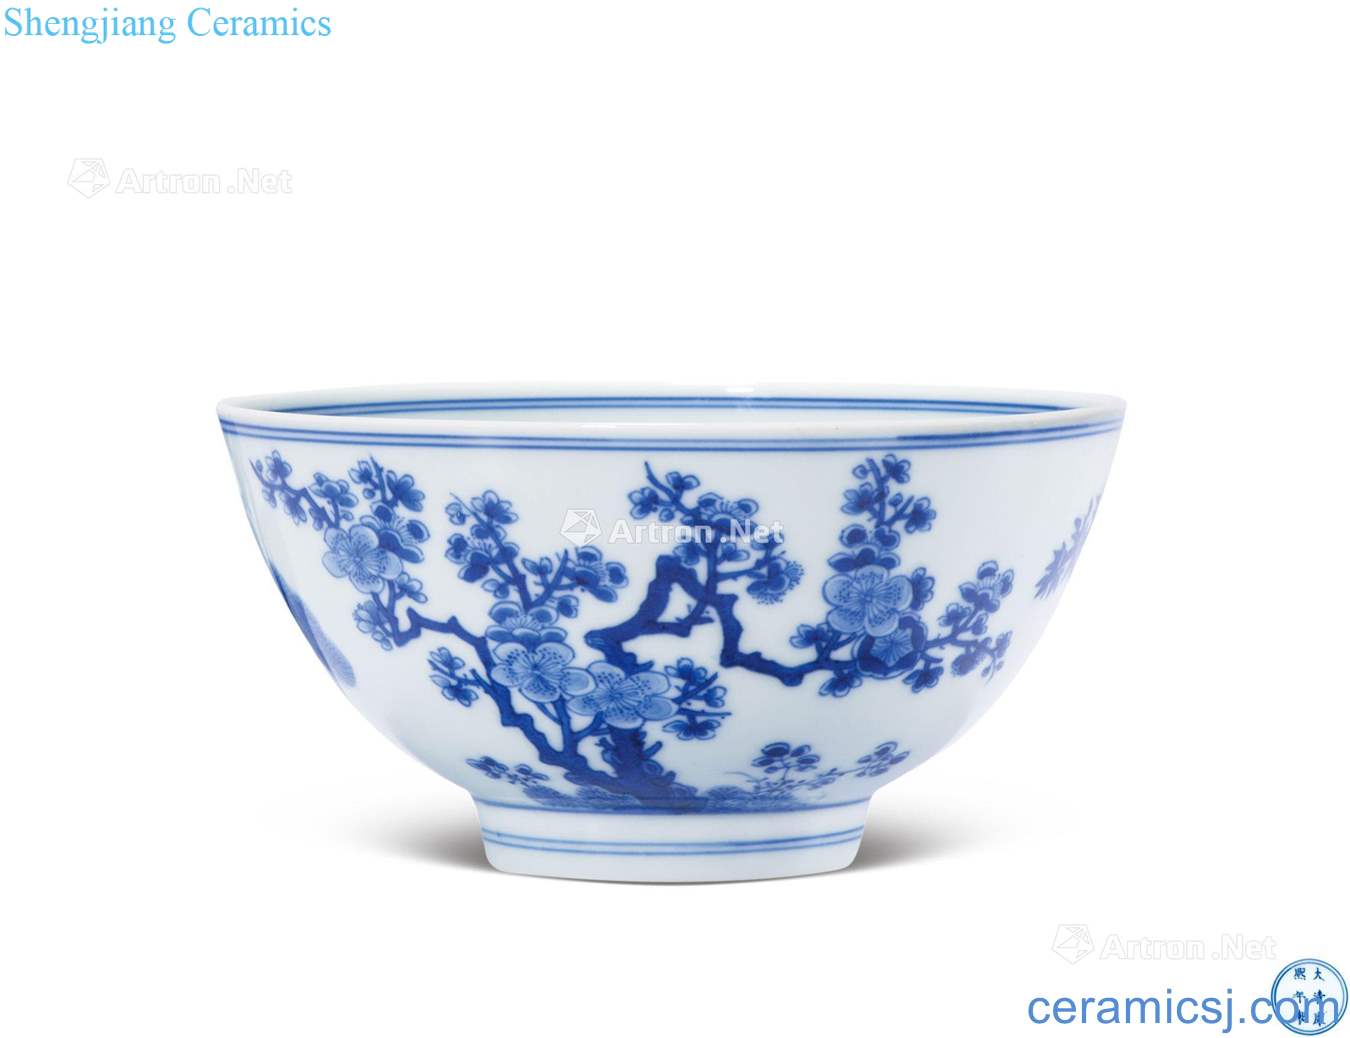 The qing emperor kangxi Blue and white, poetic lines bowl